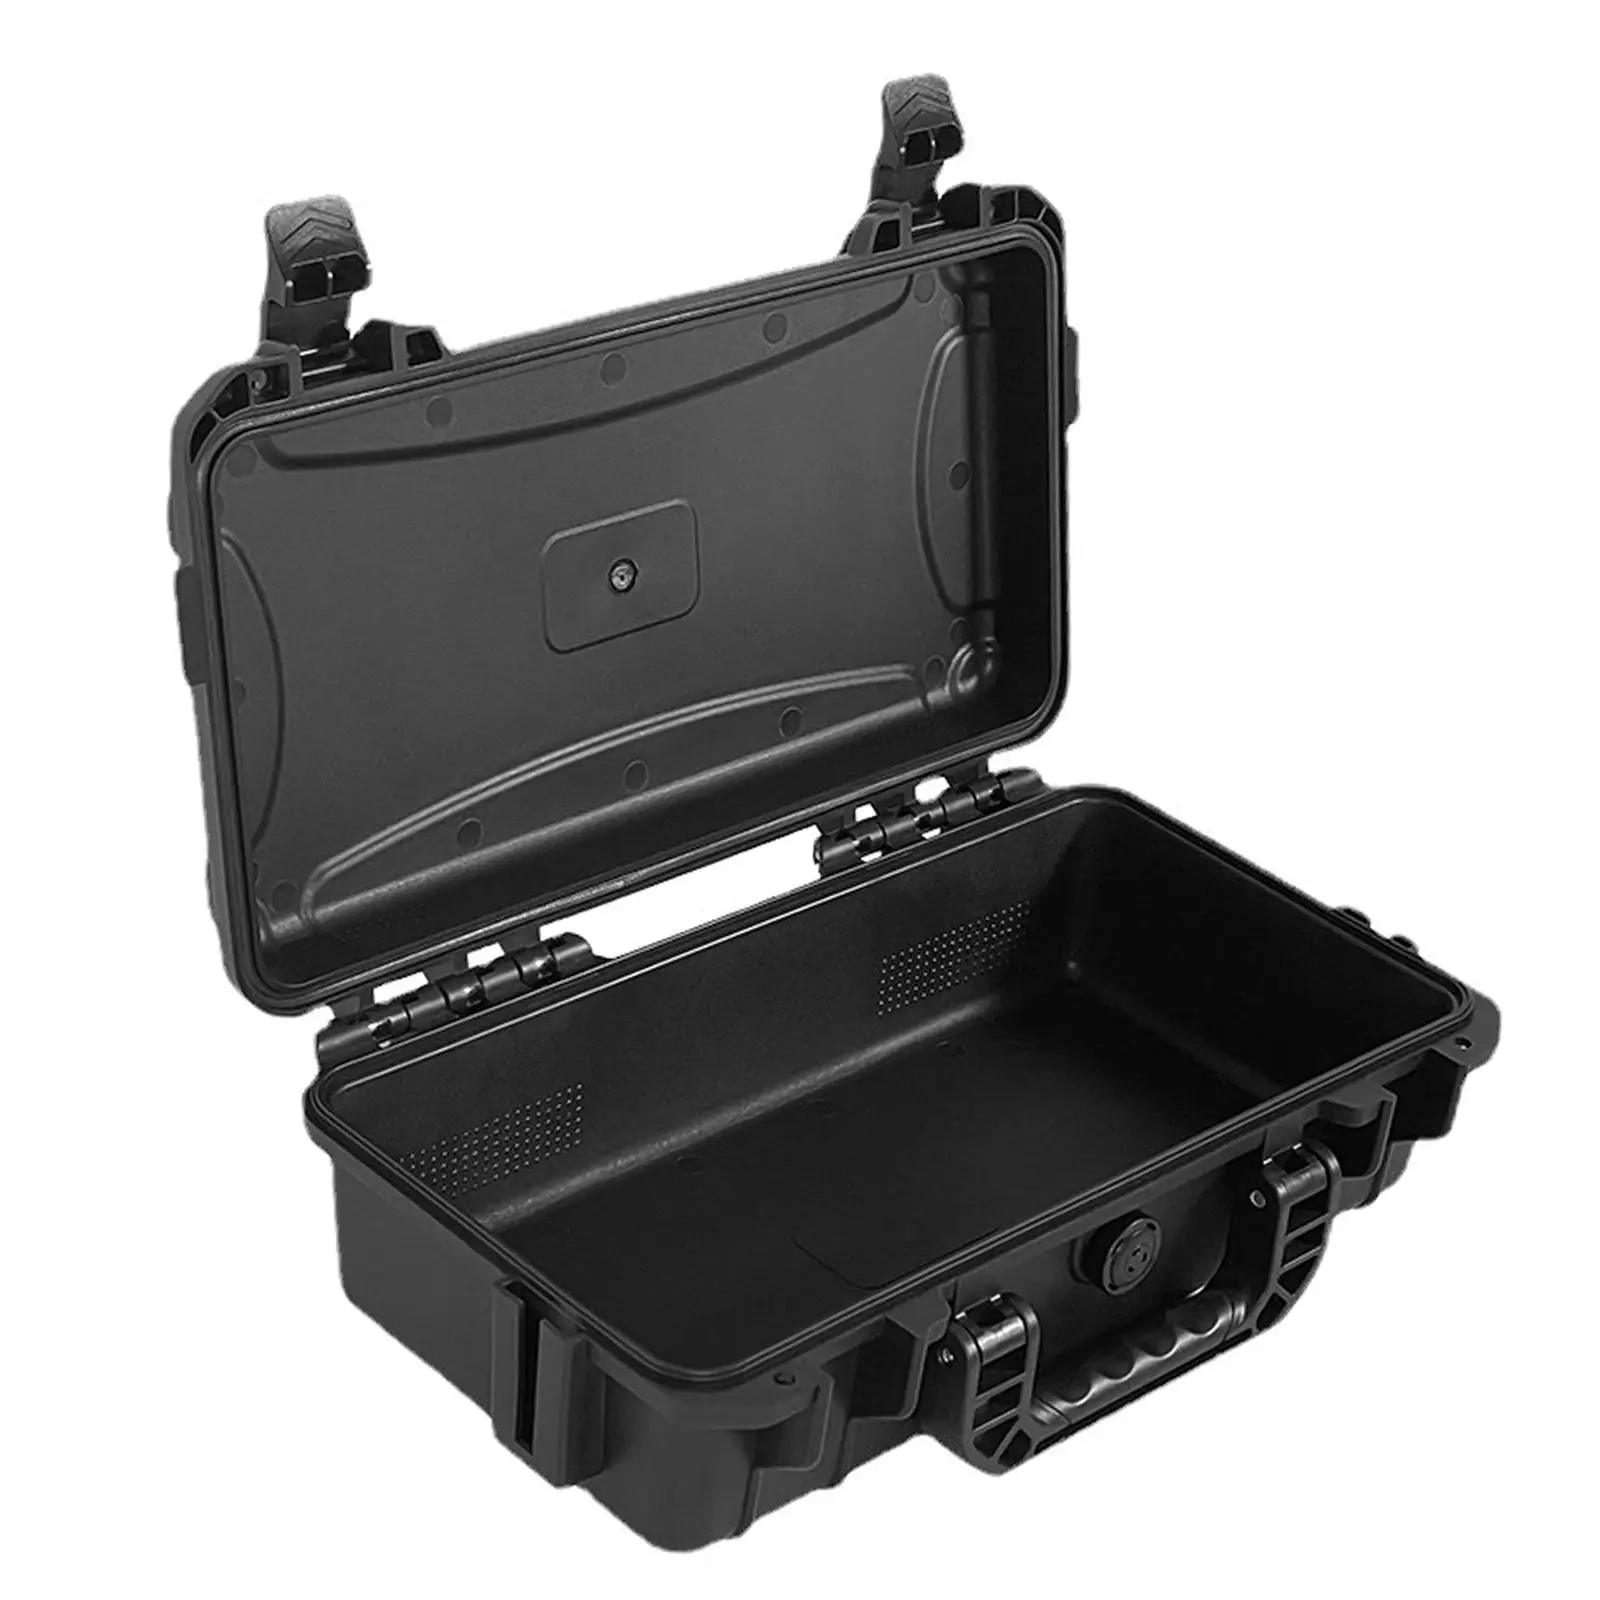 Shockproof Outdoor Storage Case carry tools Case Waterproof for Electronics Transportation